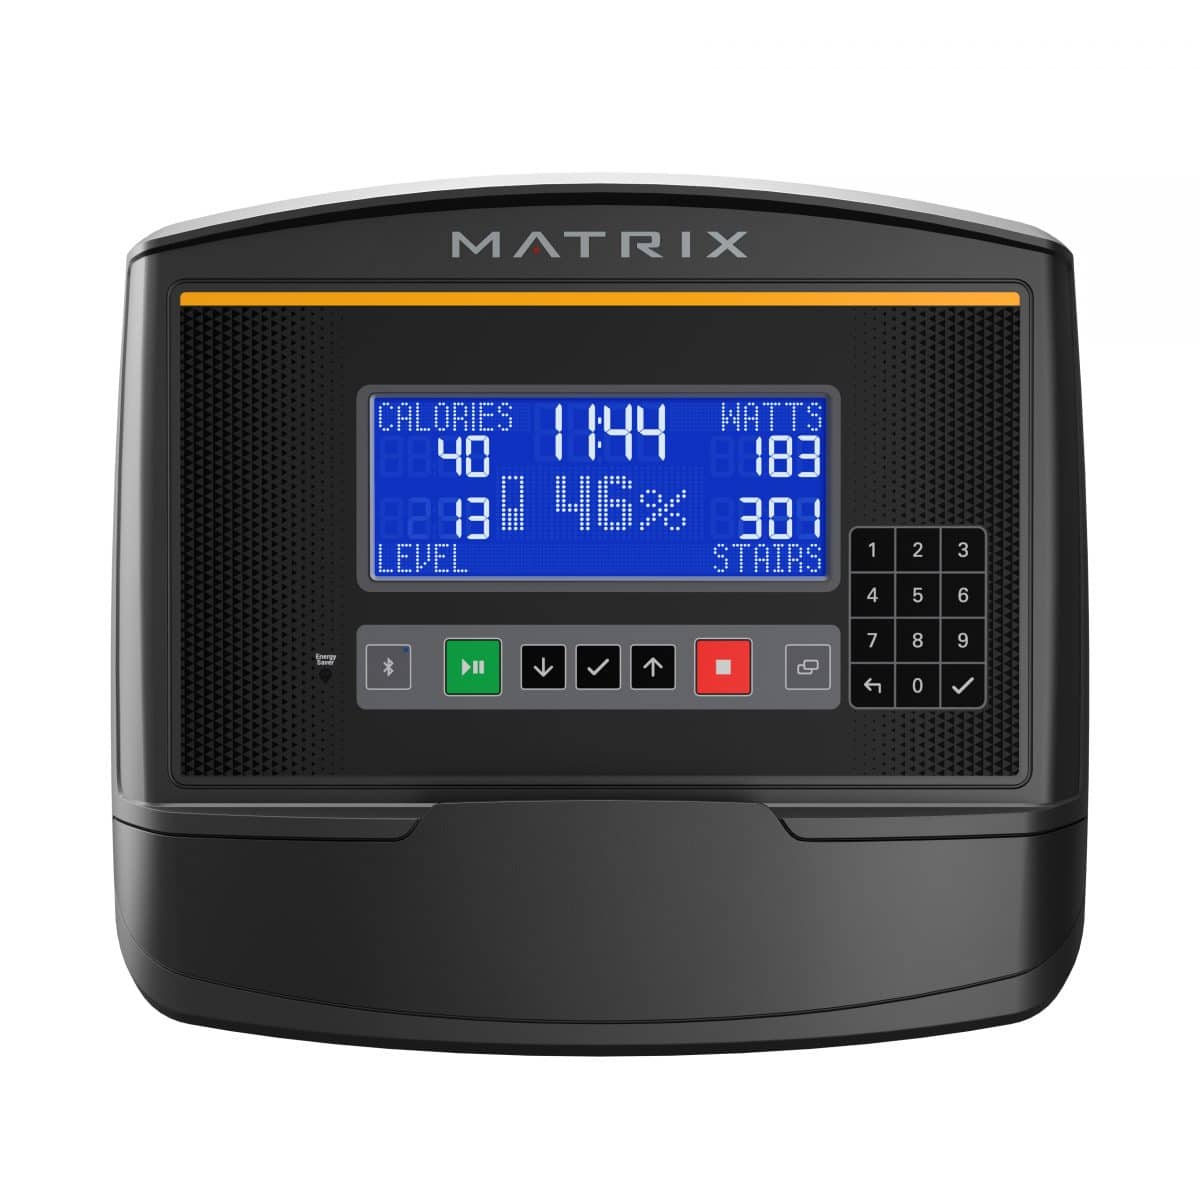 A matrix fitness machine with a lcd display.